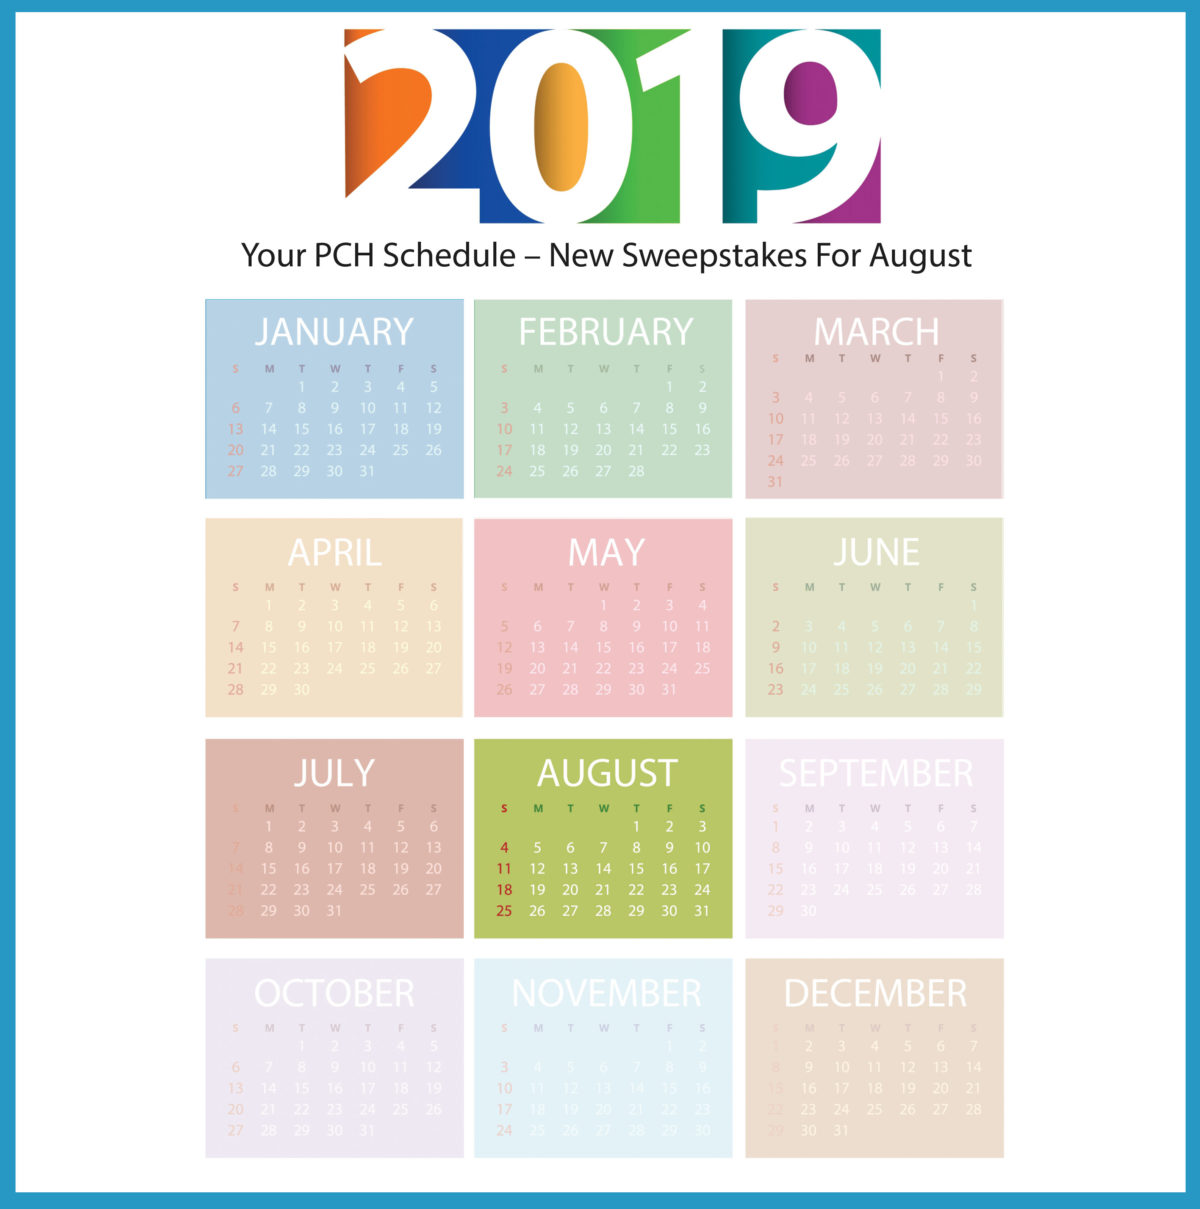 Your PCH Schedule – New Sweepstakes for August